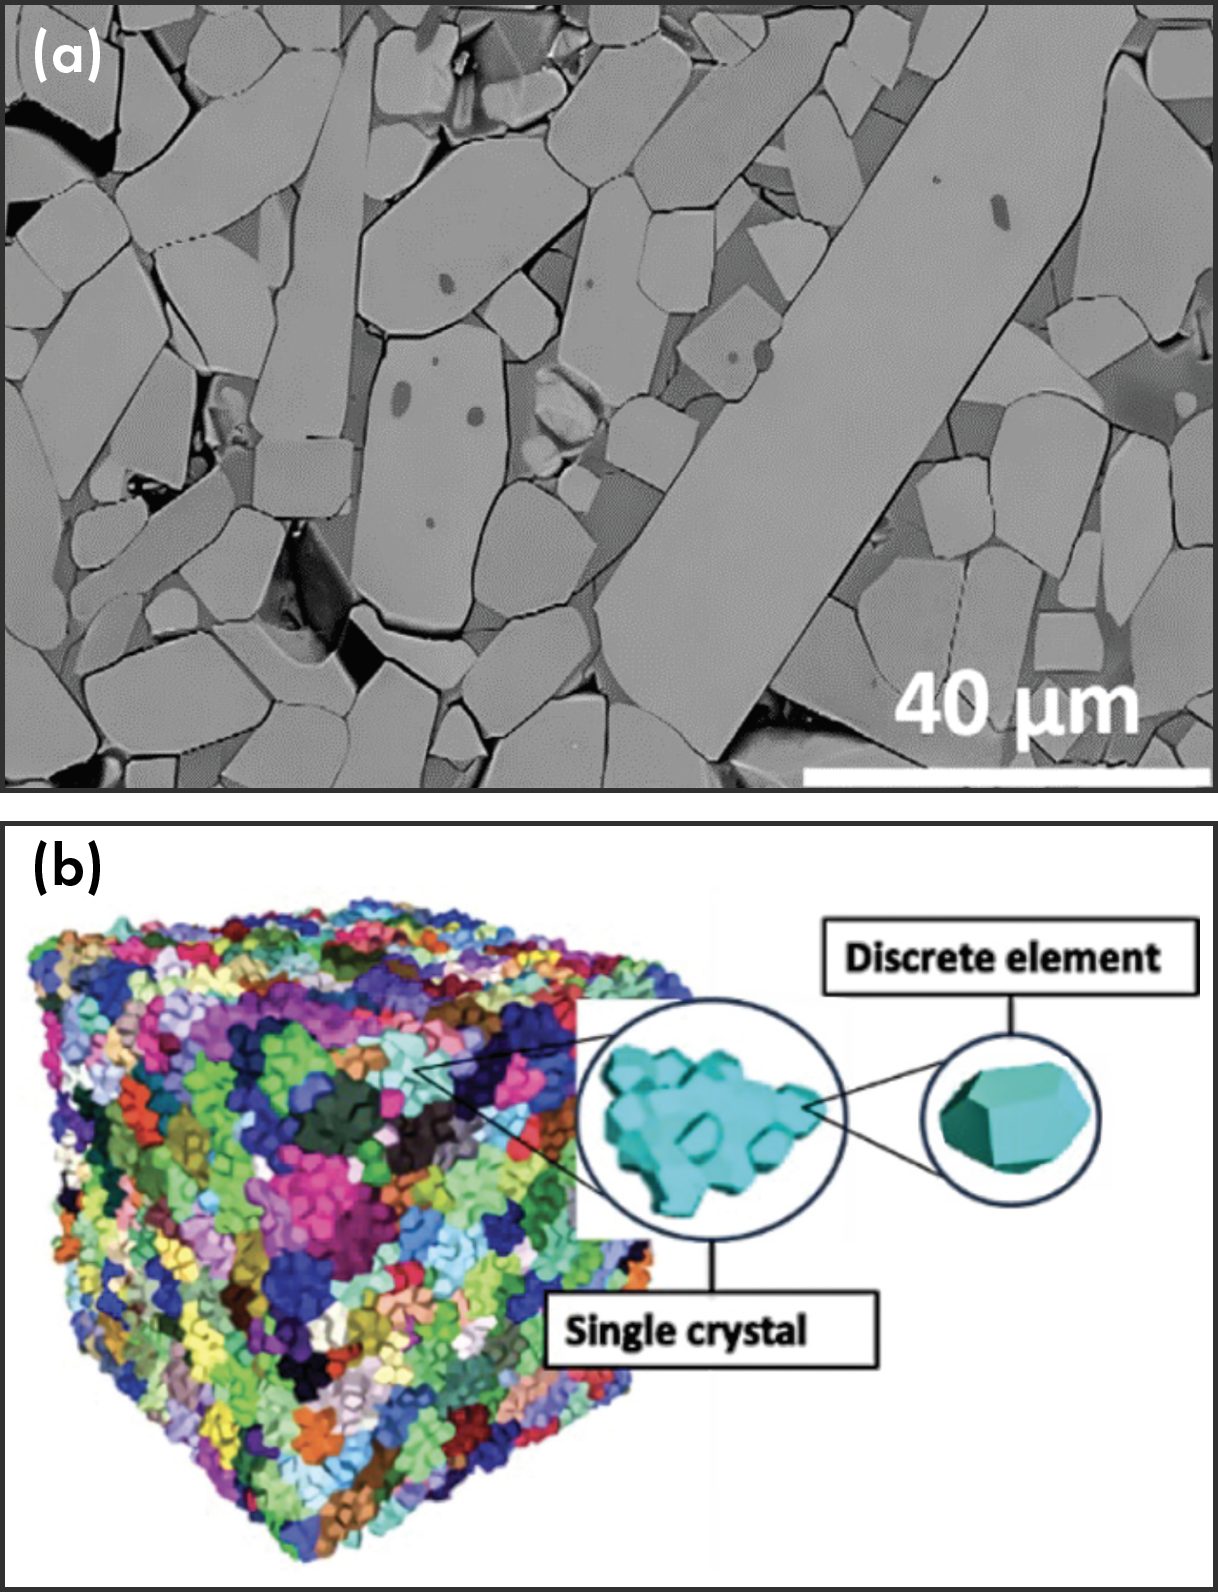 The real microstructure1 and DEM model of aluminum titanate